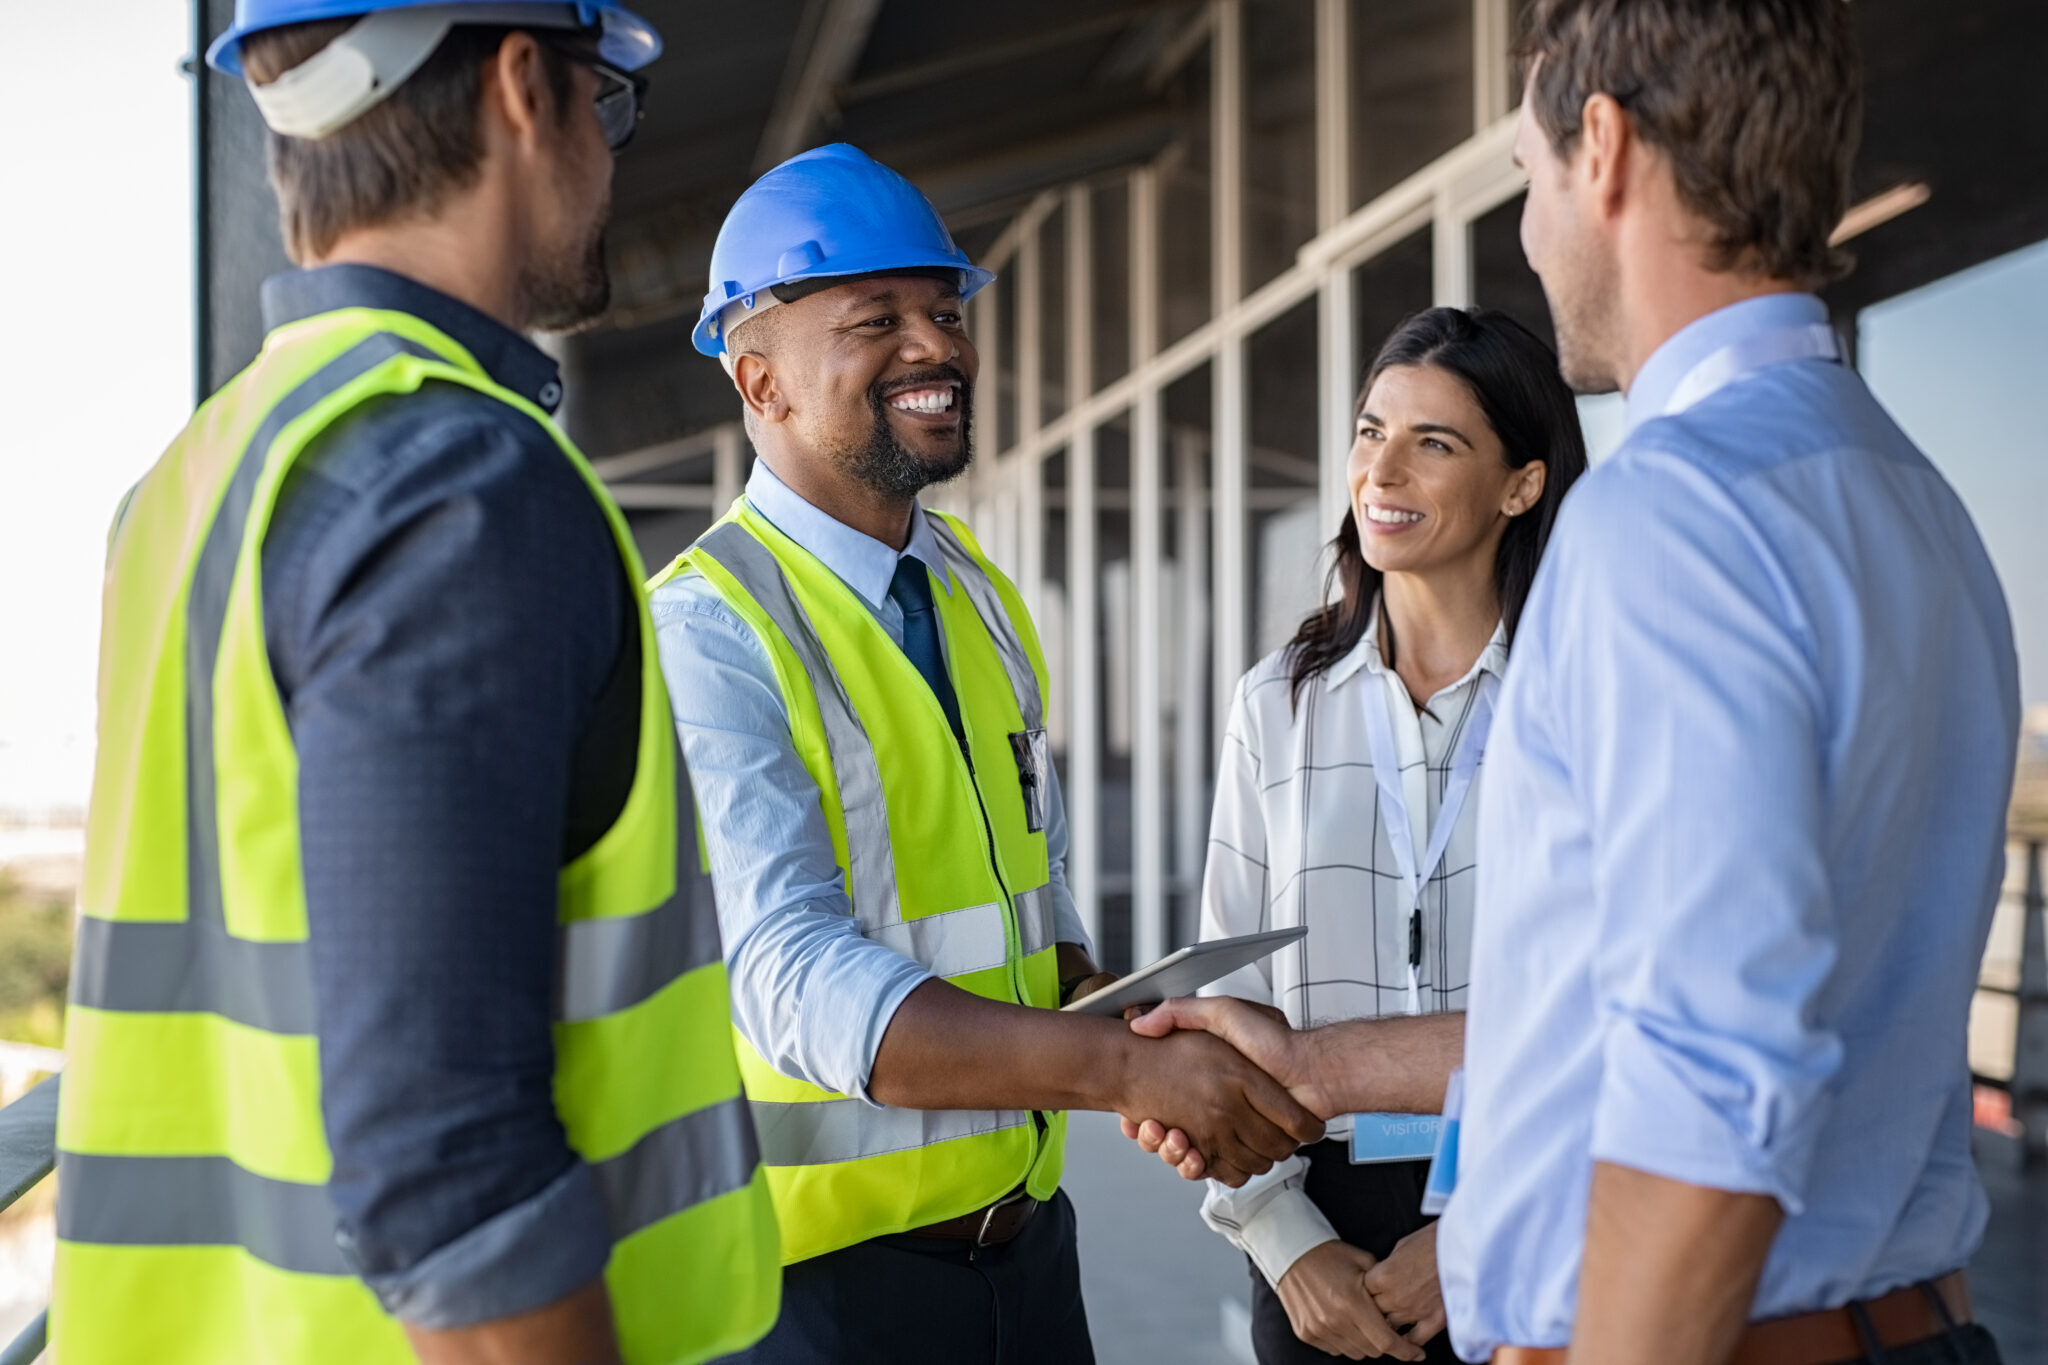 Three individuals in hard hats exchanging handshakes, symbolizing a successful collaboration in a construction setting.